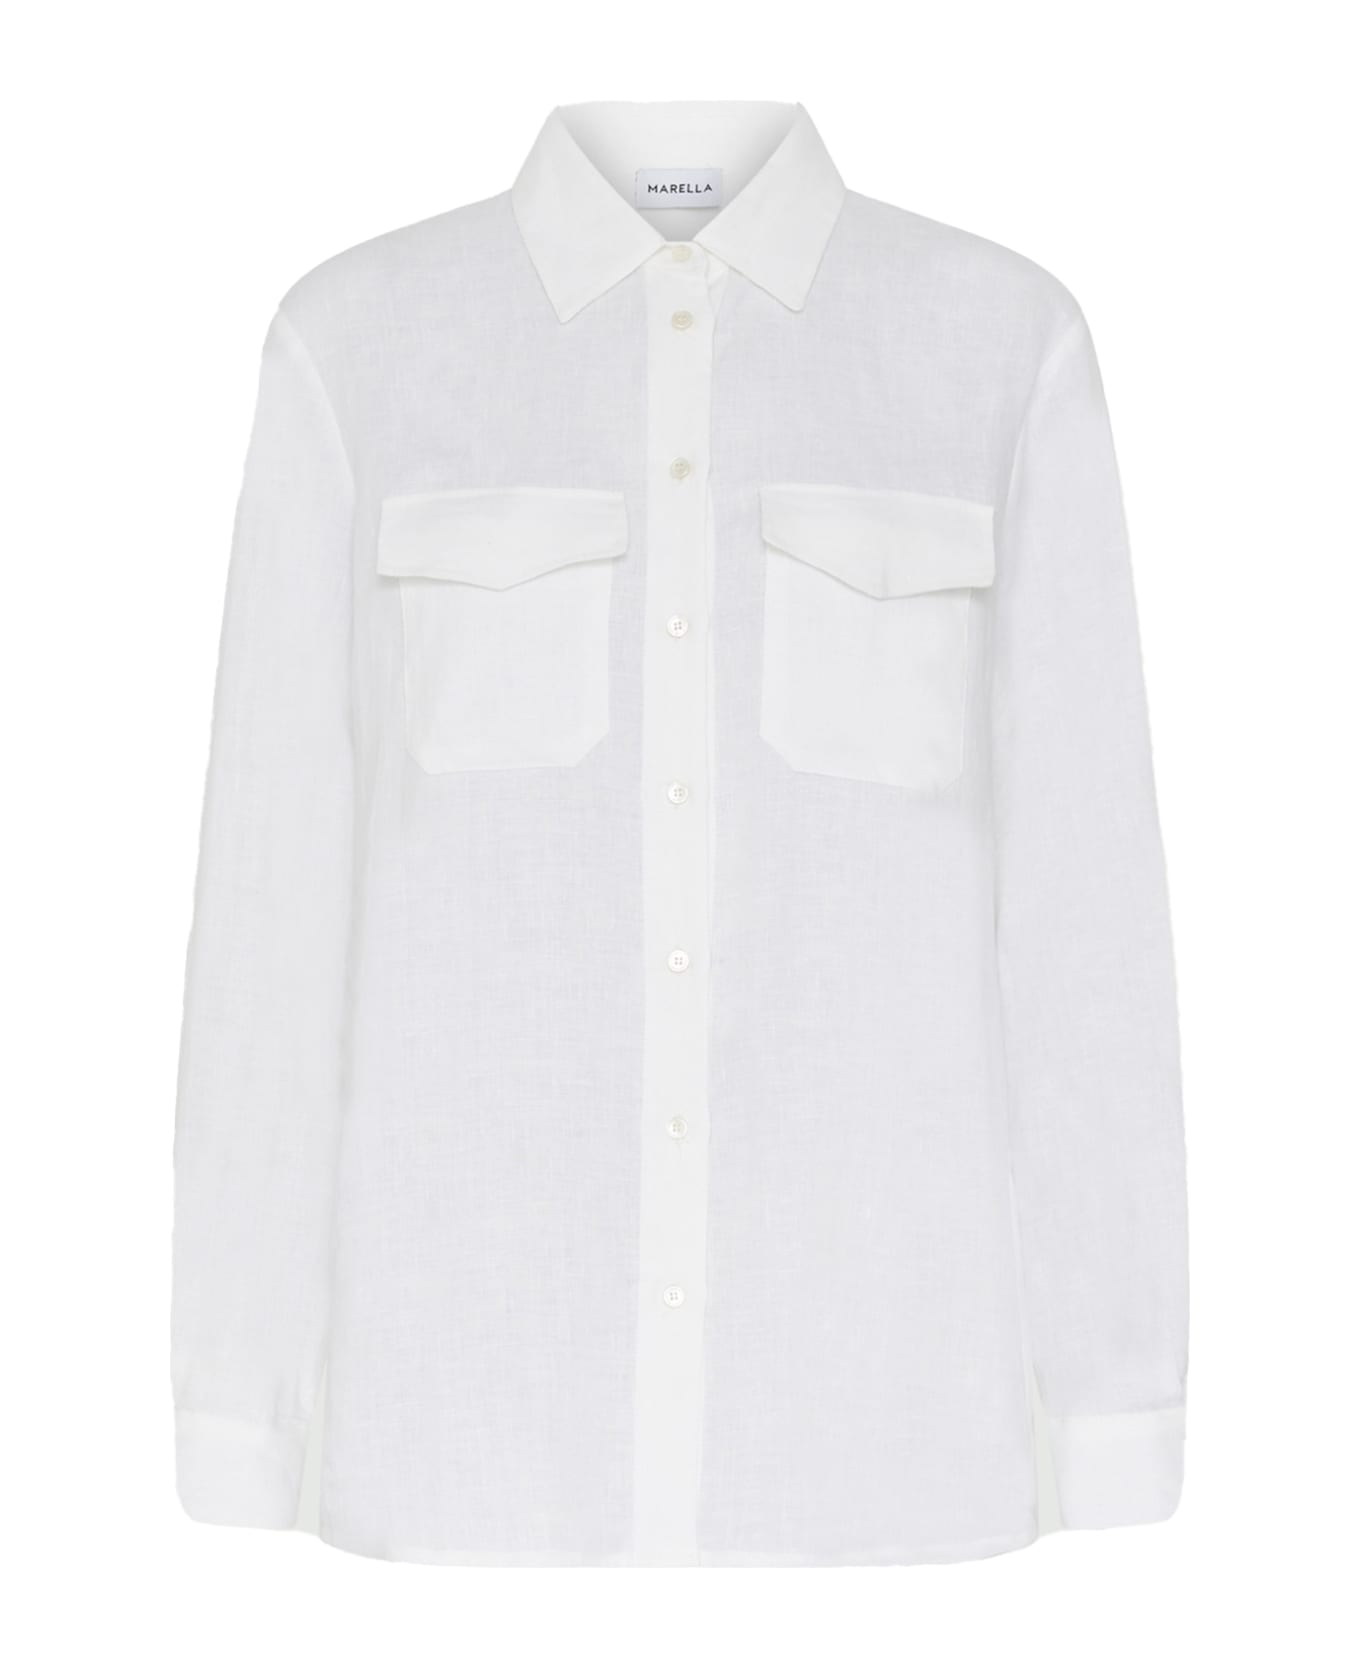 Marella White Long-sleeved Shirt With Pockets - BIANCO シャツ